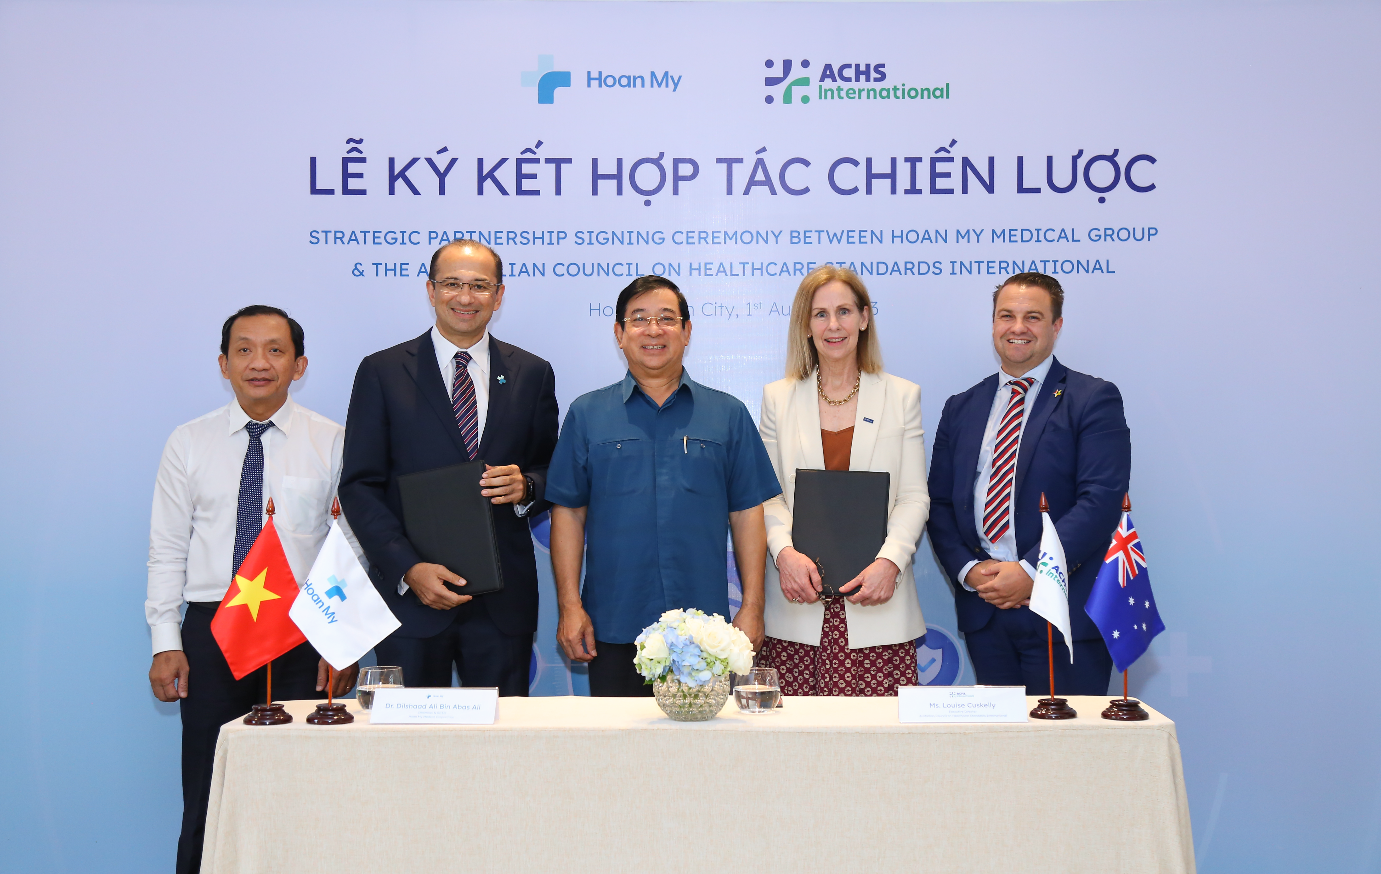 Hoan My announces strategic partnership to raise quality of care in Vietnam